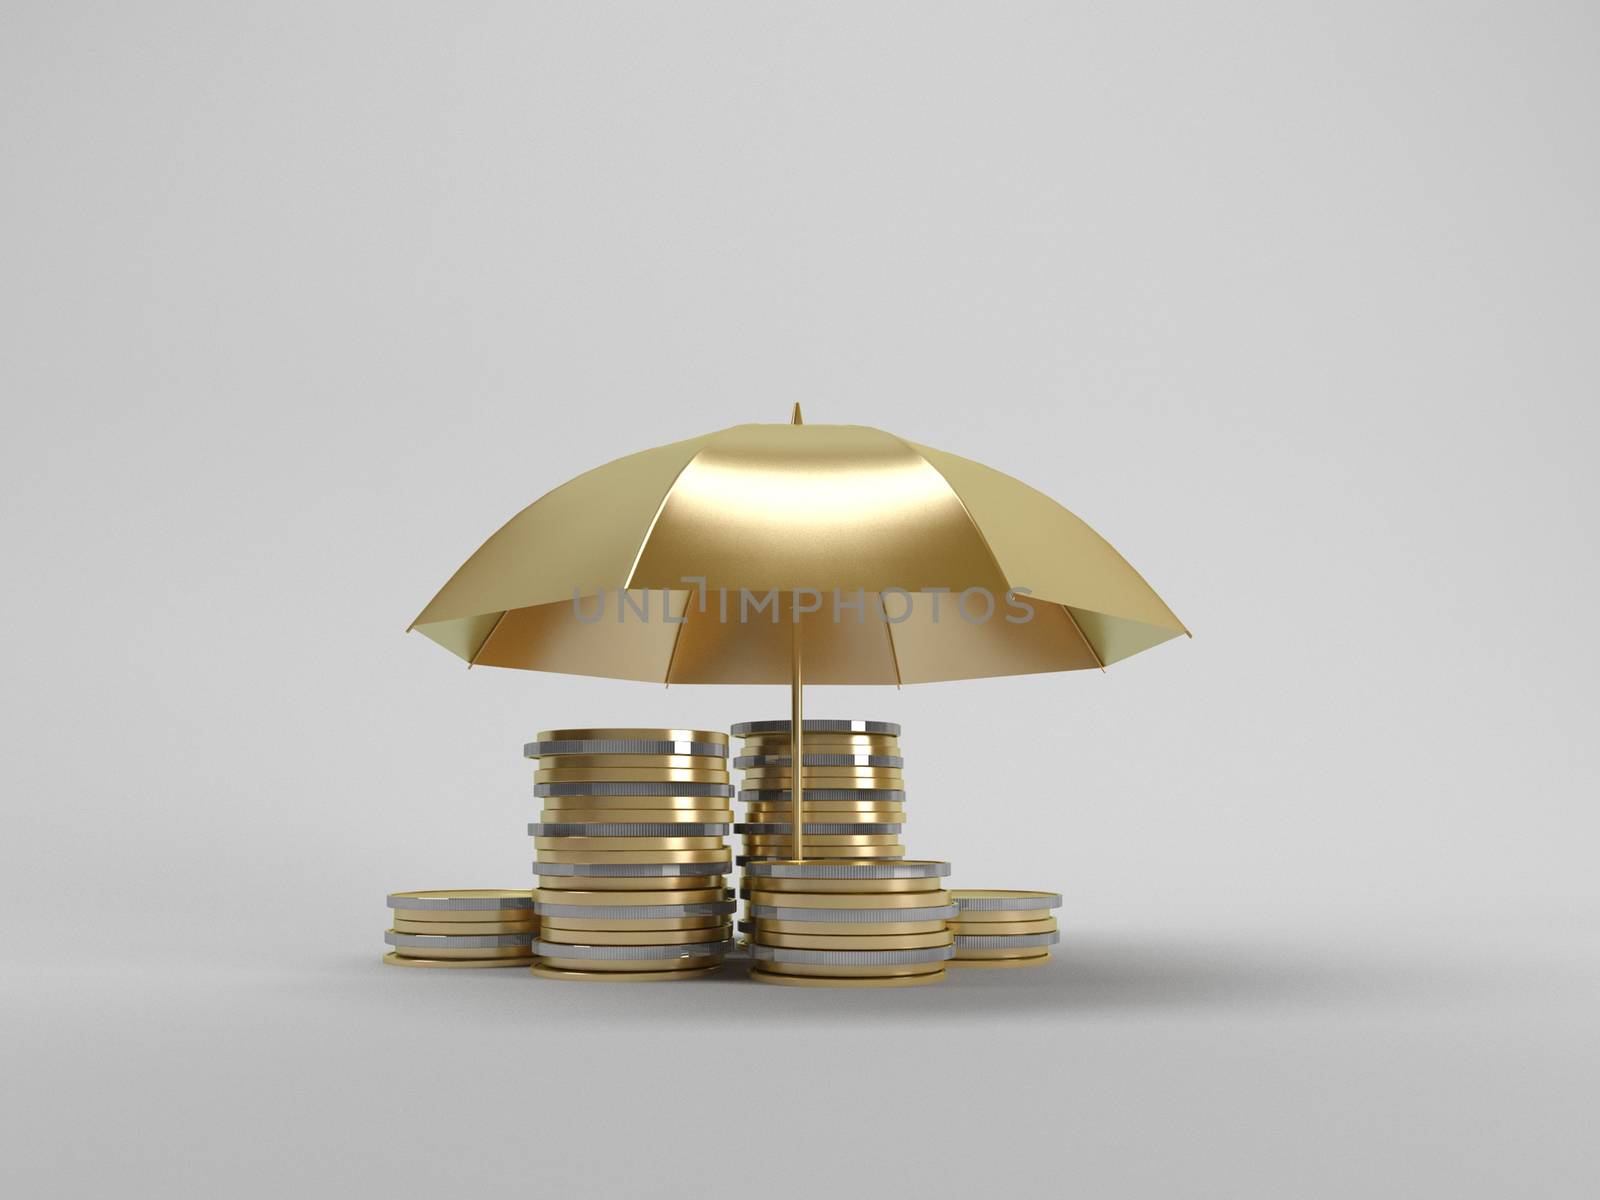 3d illustration: Protecting funds Umbrella covers gold coins on a white background